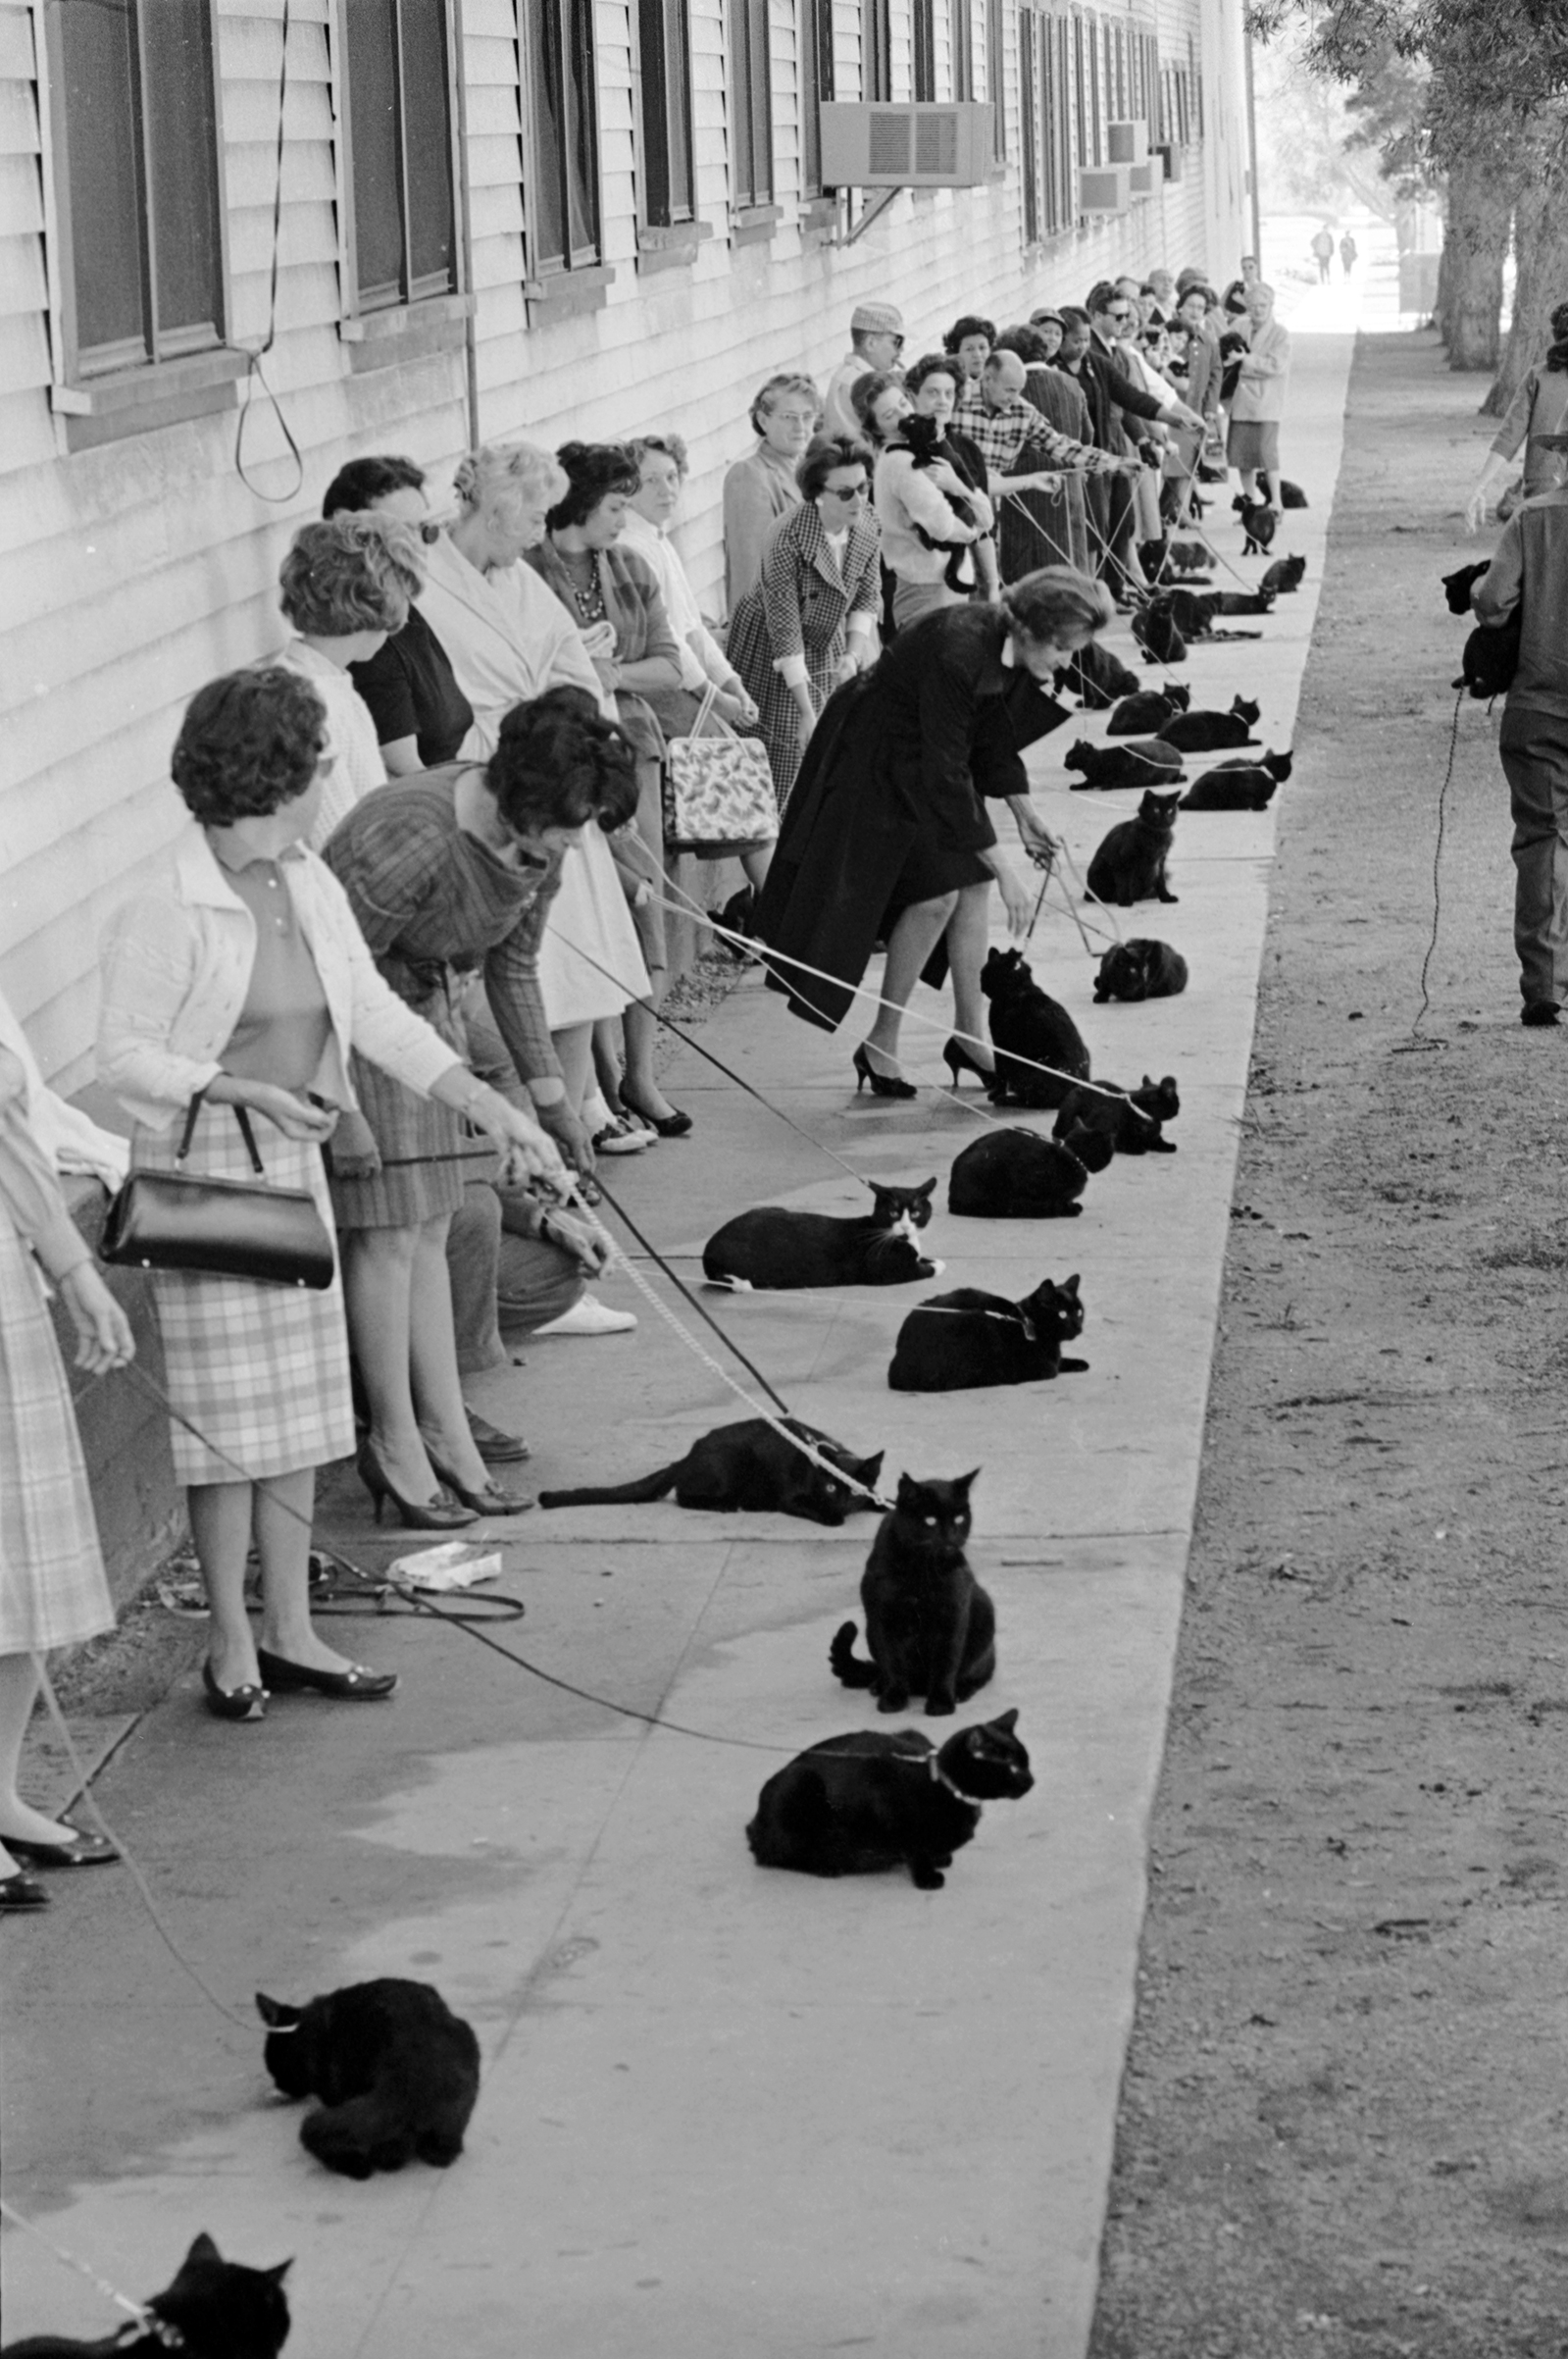 Black cats and their owners in line for audition and casting for movie "Tales of Terror," 1961.